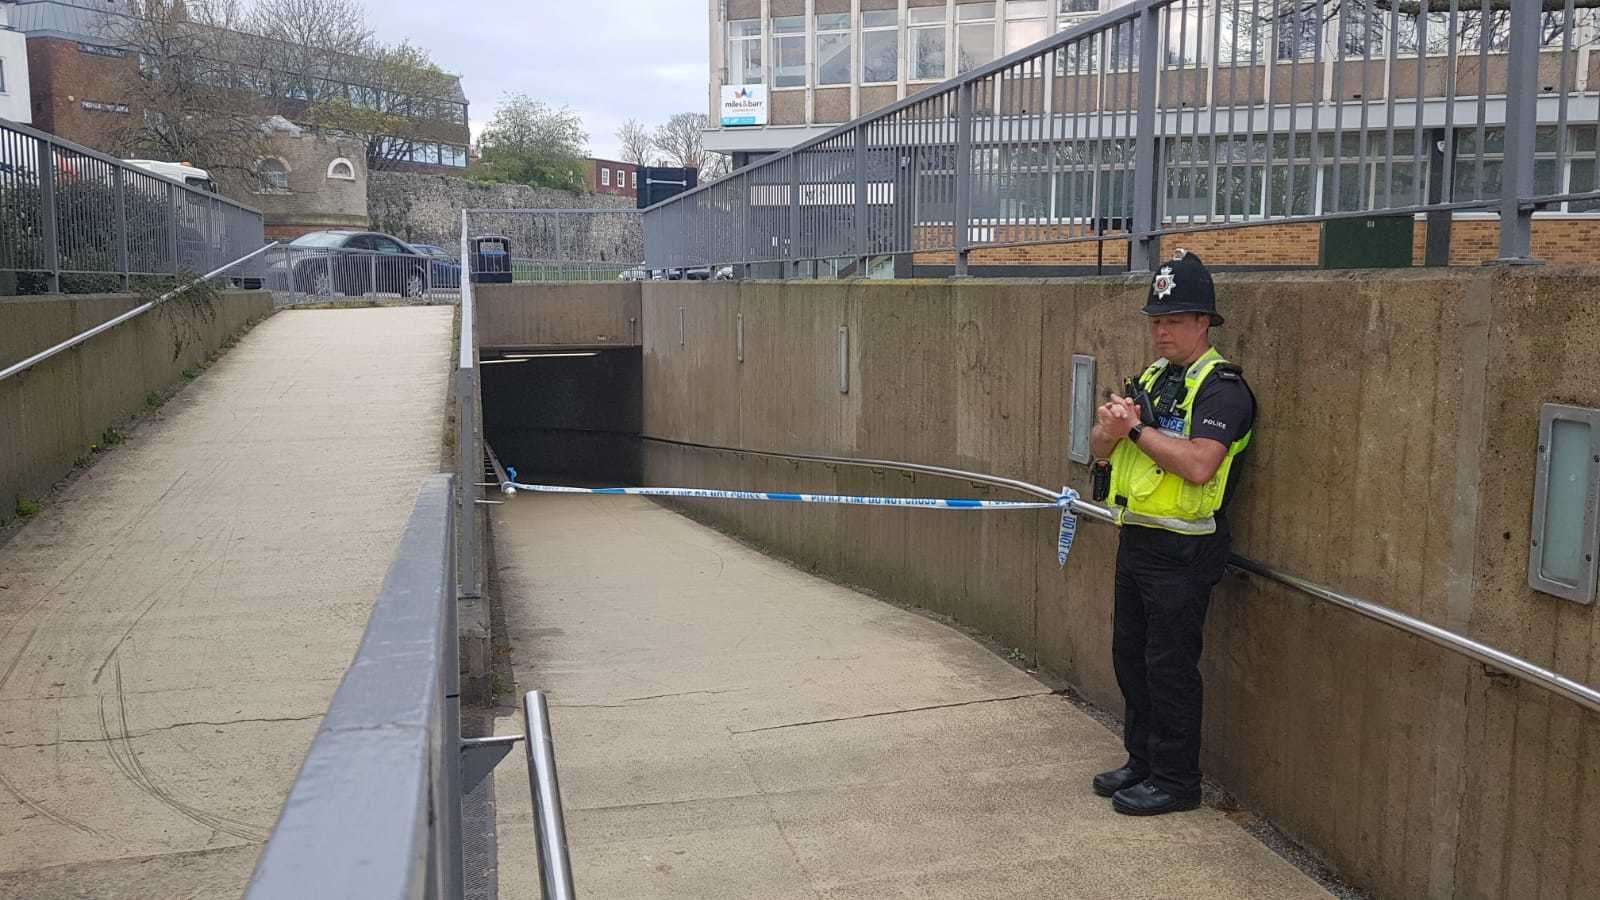 The St George's underpass is taped off